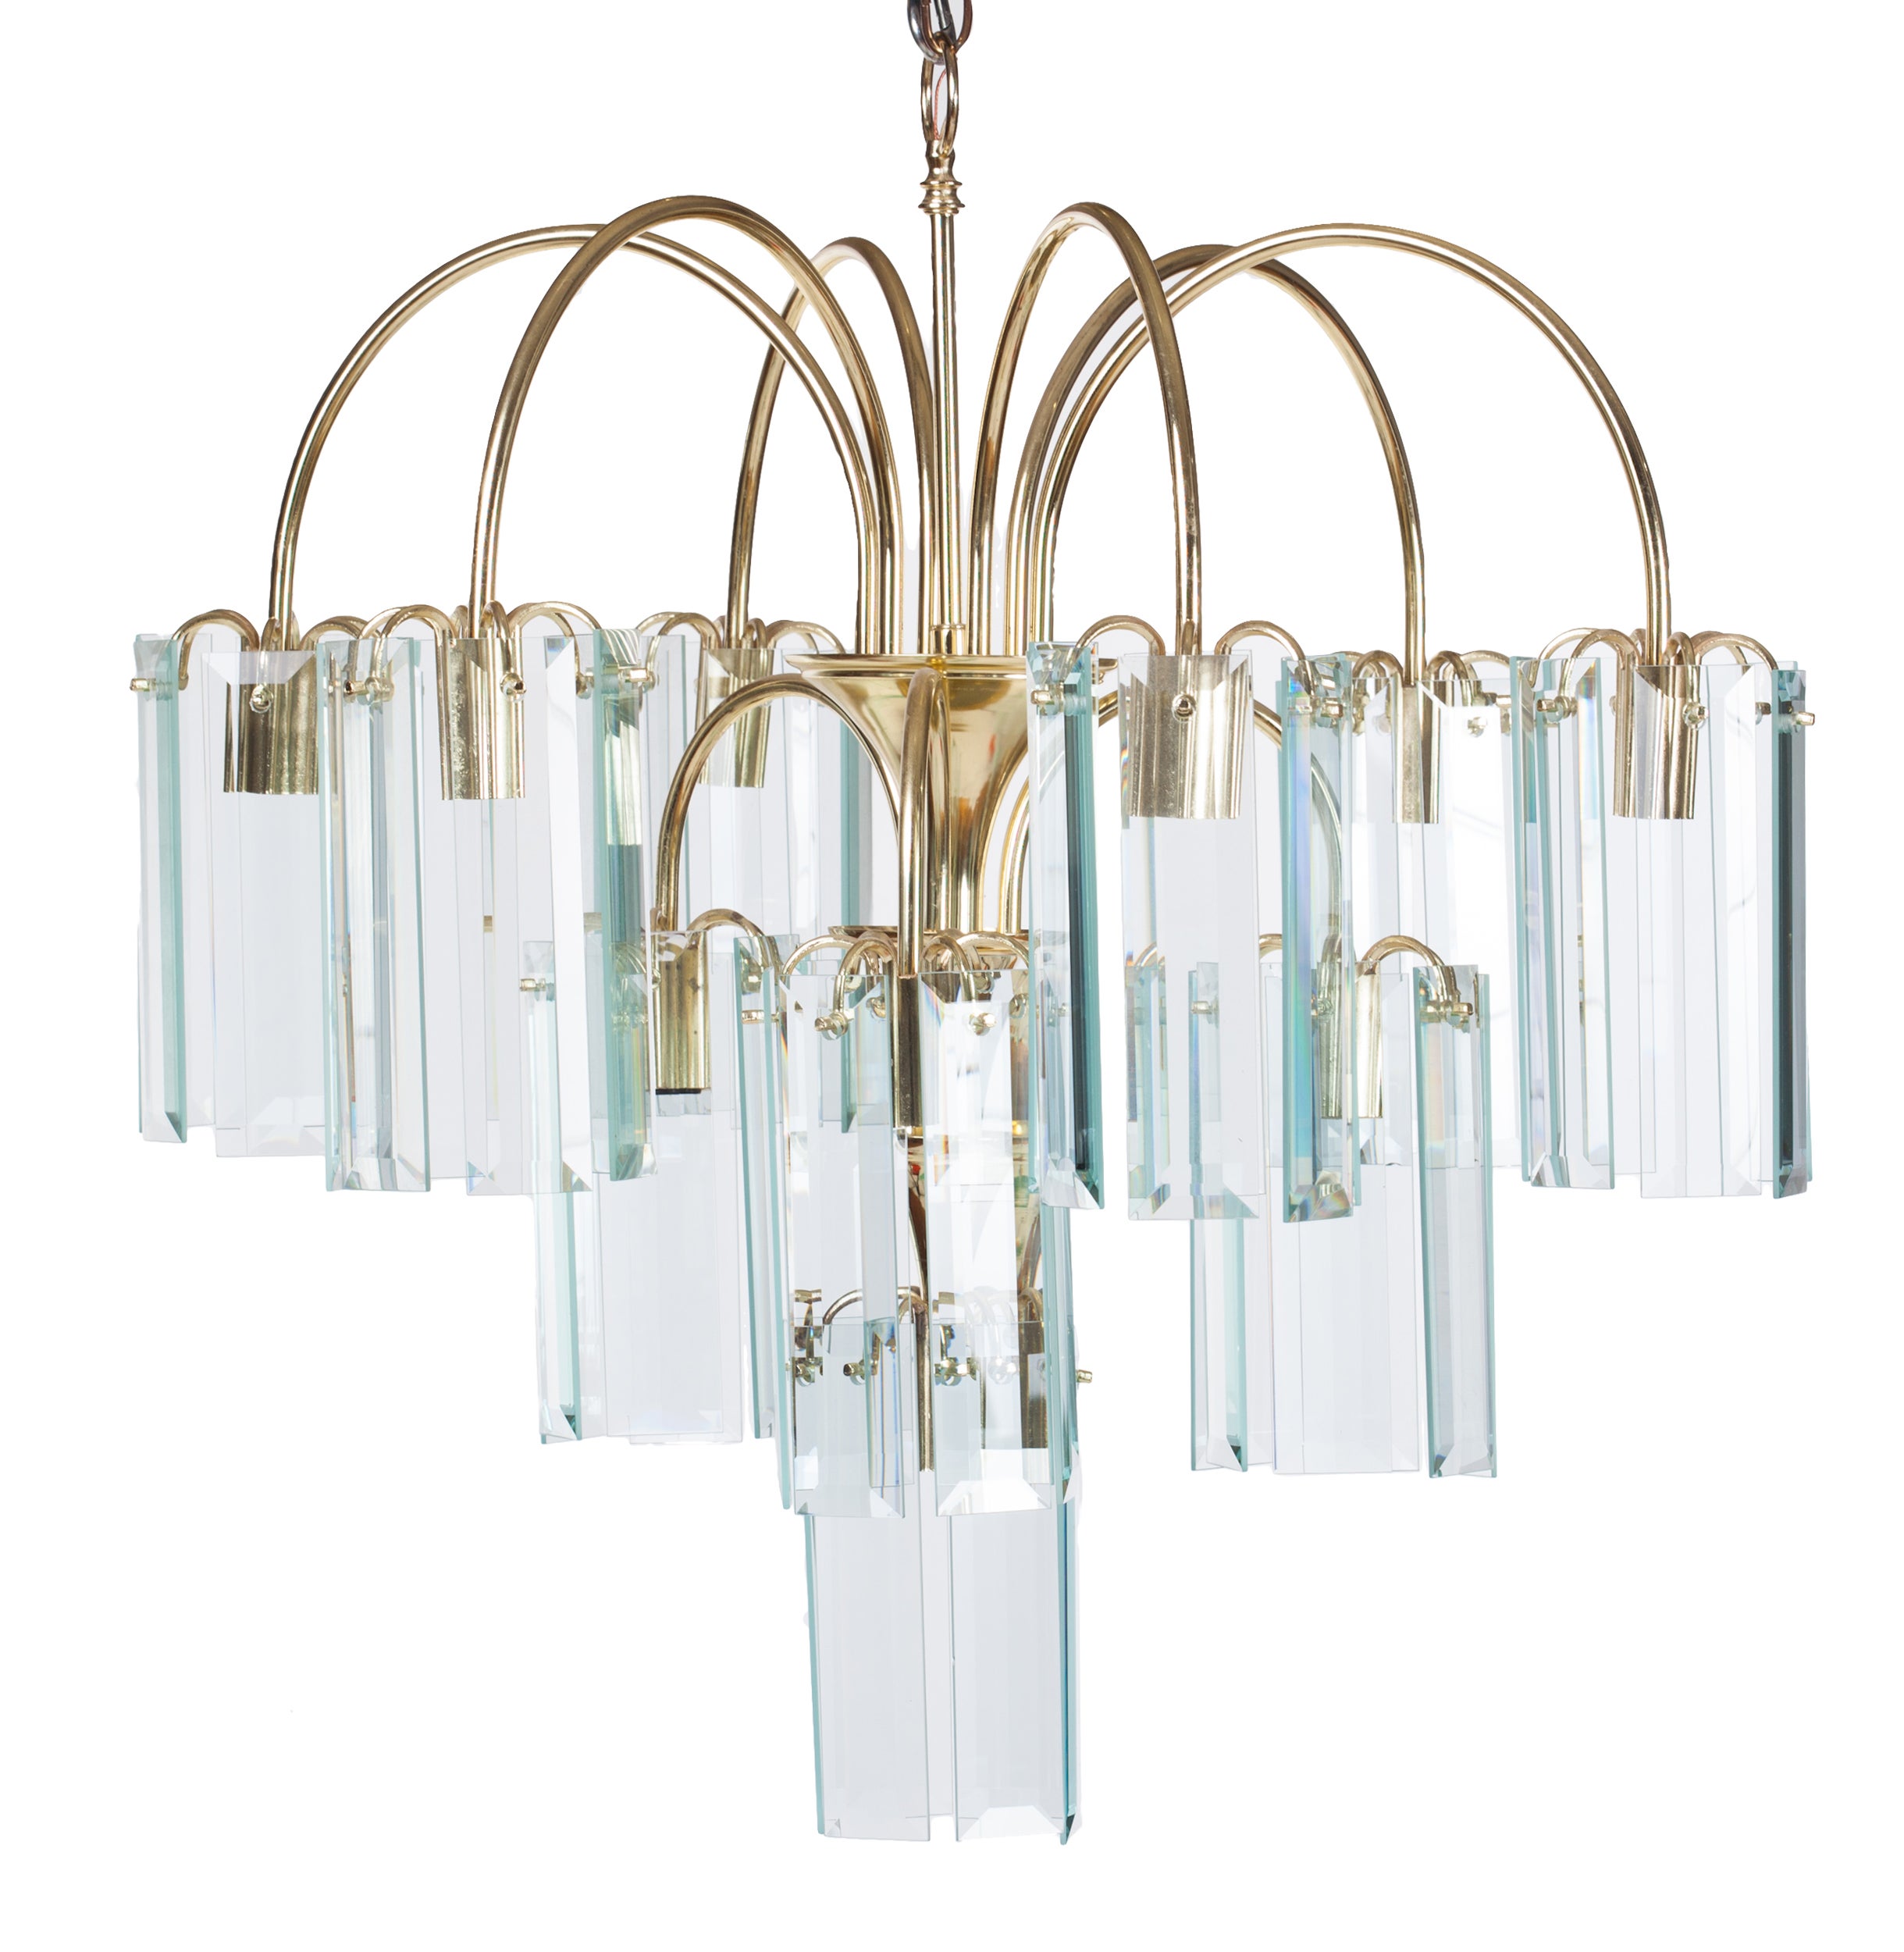 Waterfall Beveled Glass and Brass Chandelier